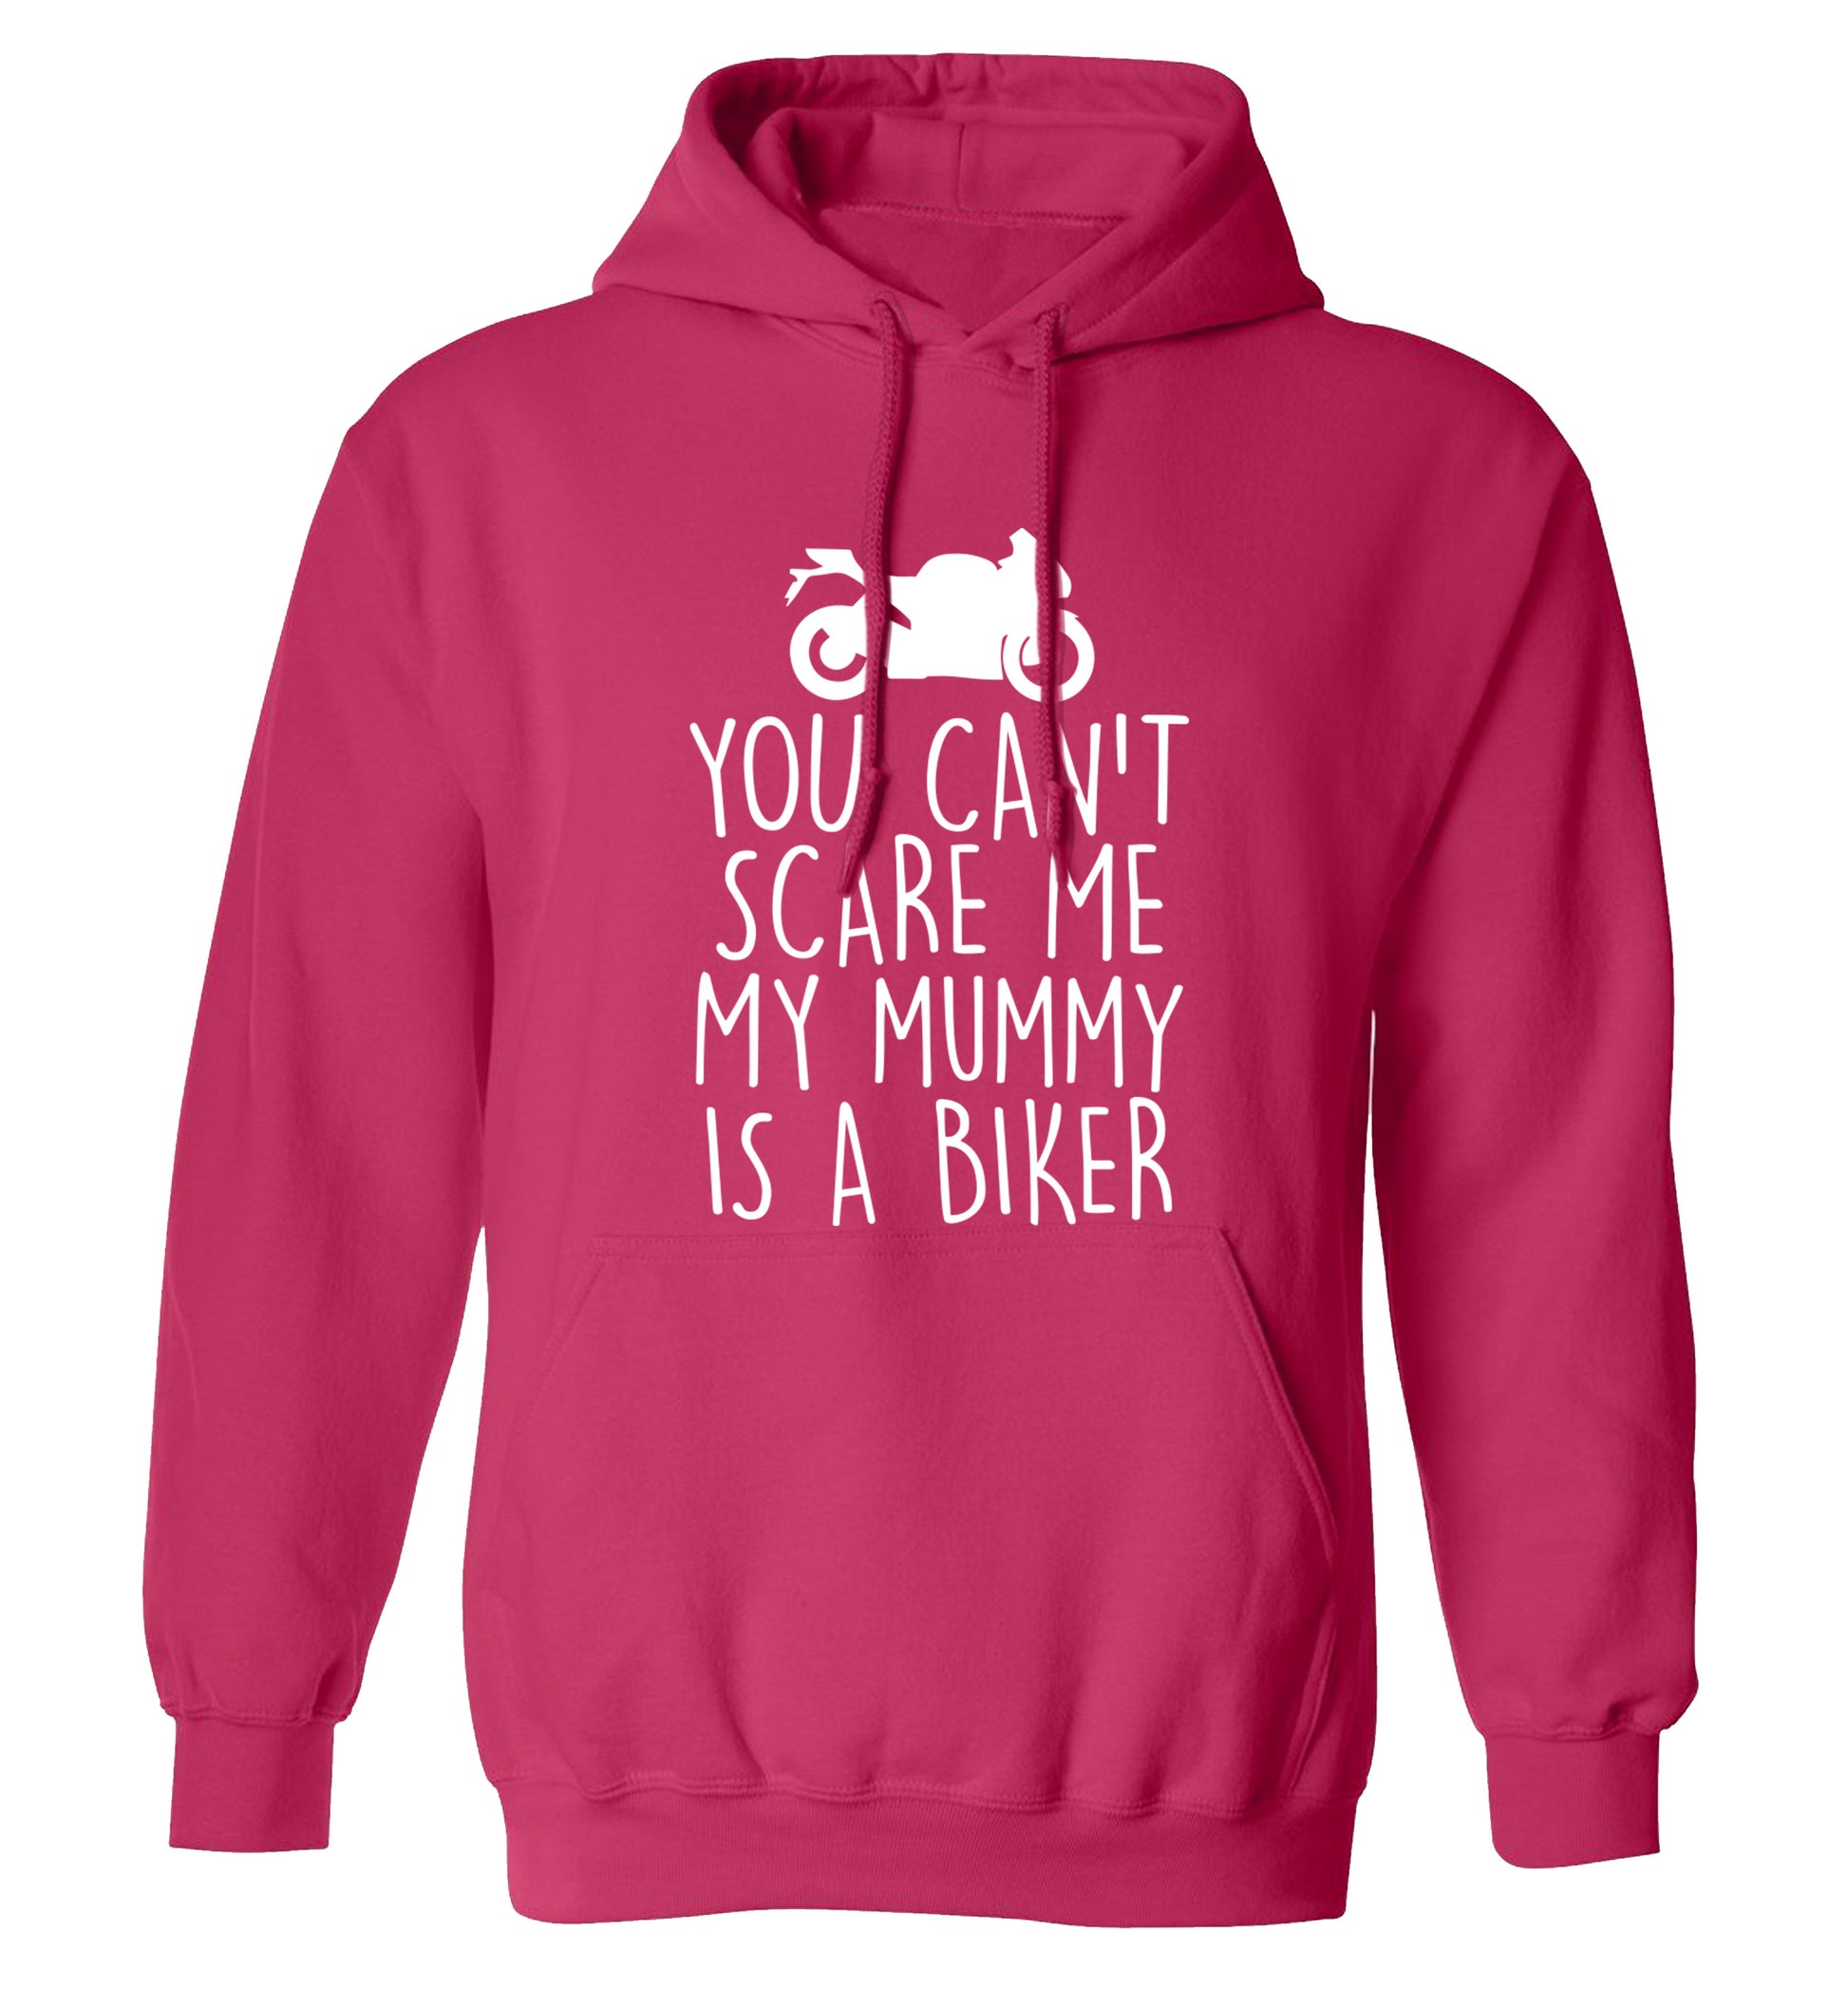 You can't scare me my mummy is a biker adults unisex pink hoodie 2XL